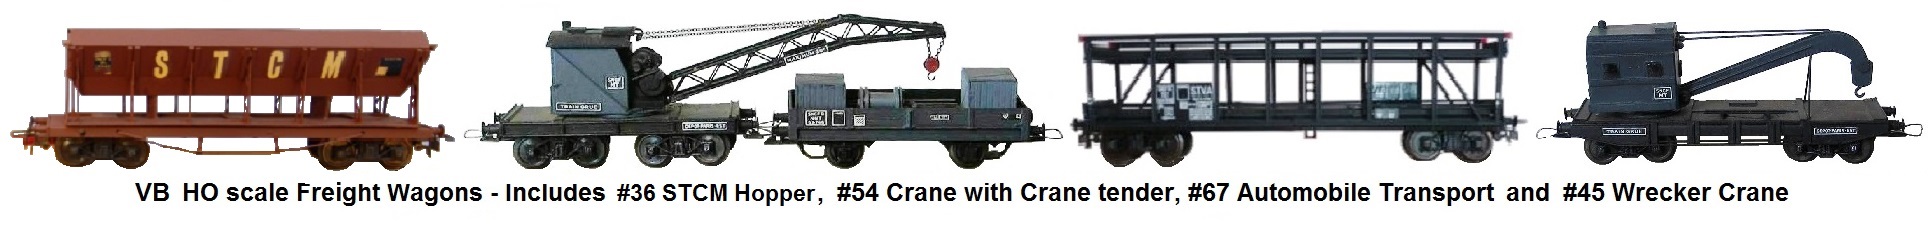 VB HO scale Freight Wagons, includes #36 STCM Hopper, #54 Crane with Tender, #67 Auto Transport, and #45 Wrecker